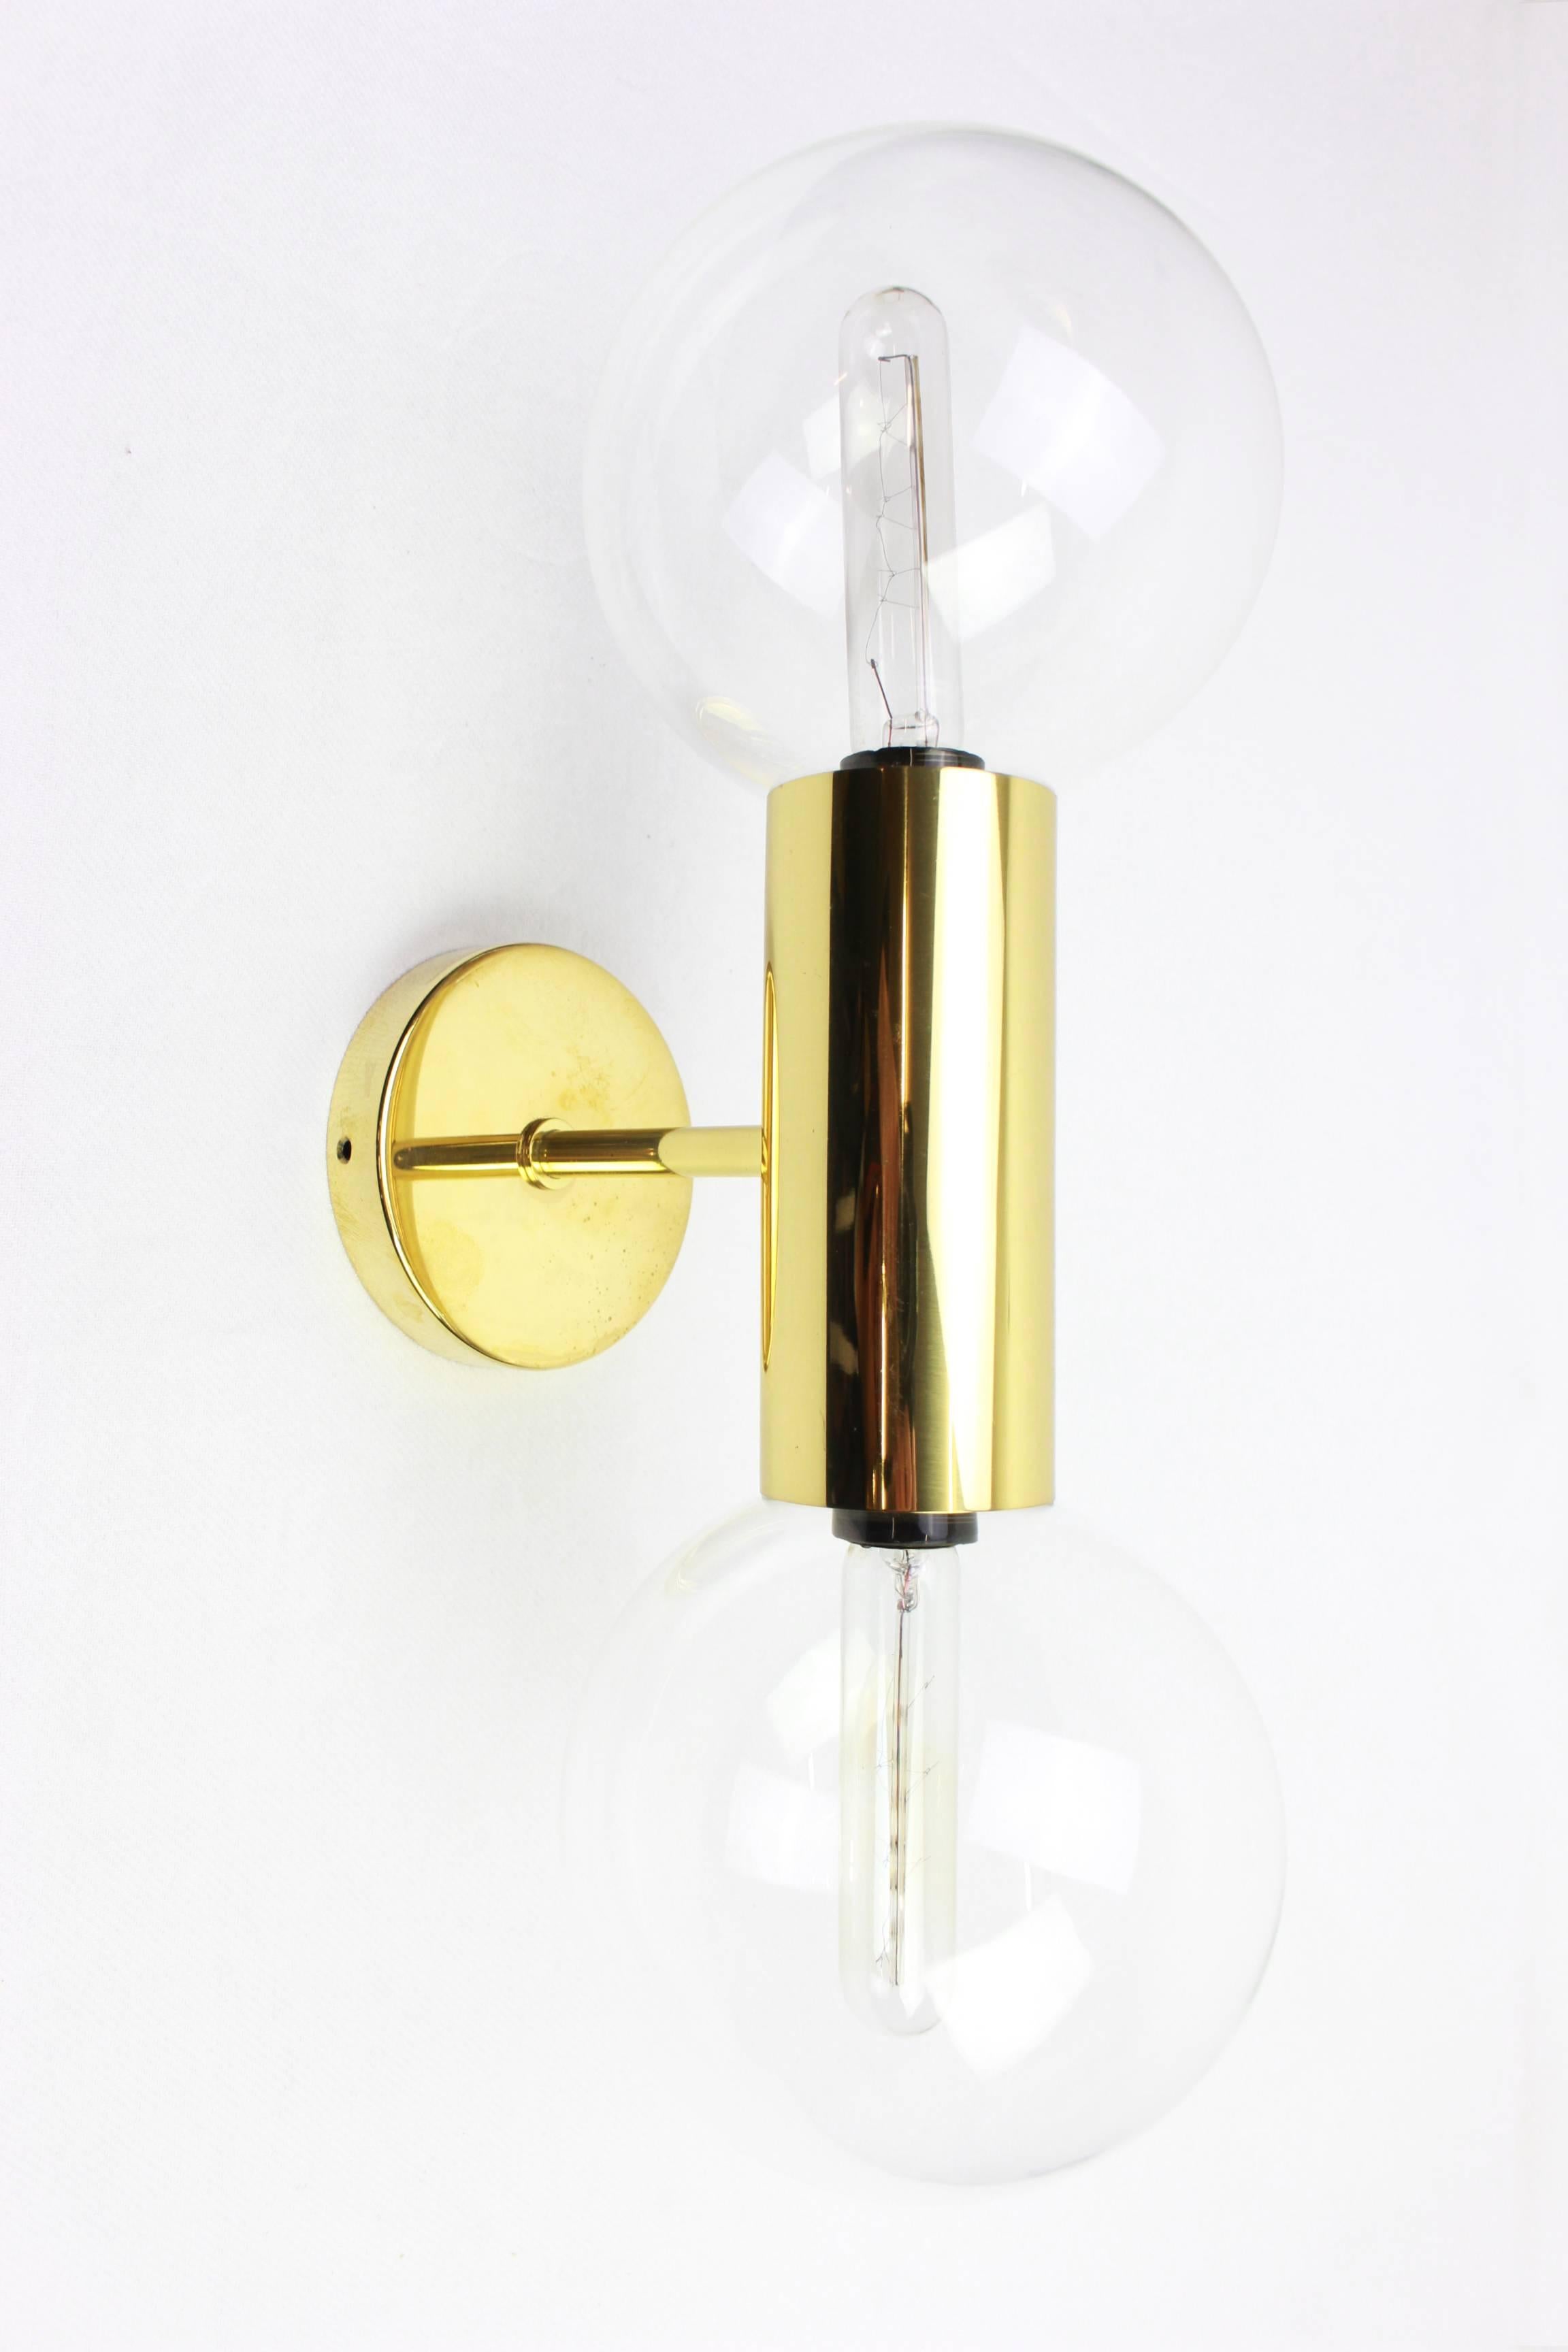 Wonderful pair of Sputnik brass wall sconces designed by Motoko Ishii made for Staff Leuchten, manufactured in Germany, circa 1970s.

High quality and in very good condition. Cleaned, well-wired and ready to use. 

Each Sconce requires 2 x E14